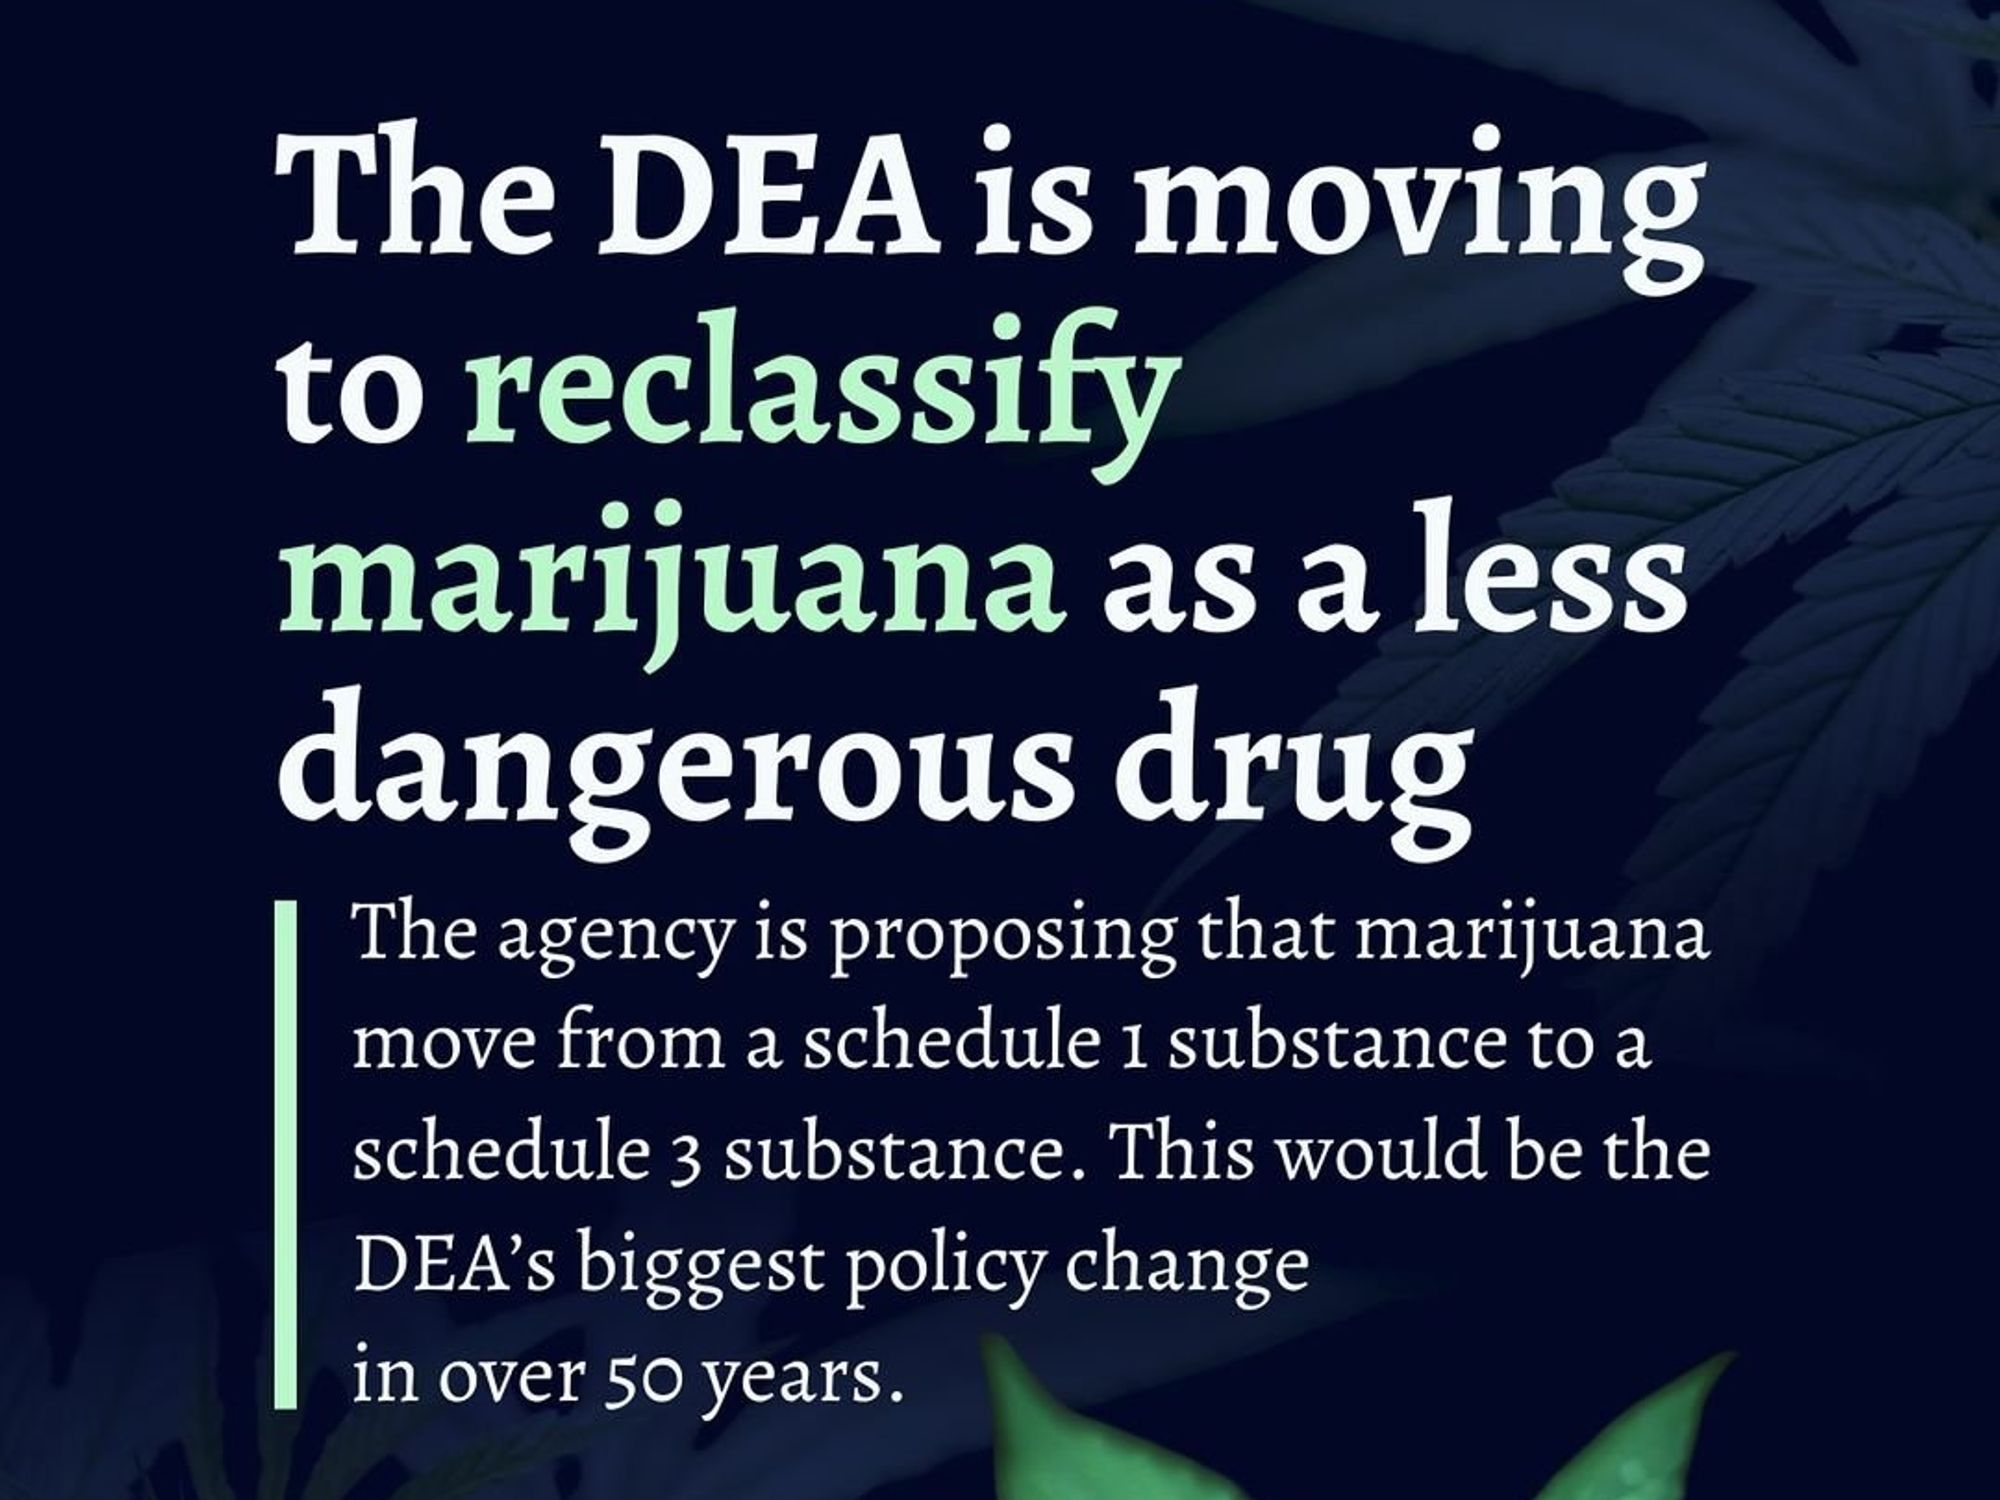 Graphic illustrating the breaking news: The DEA announces the reclassification of marijuana as a less harmful substance.